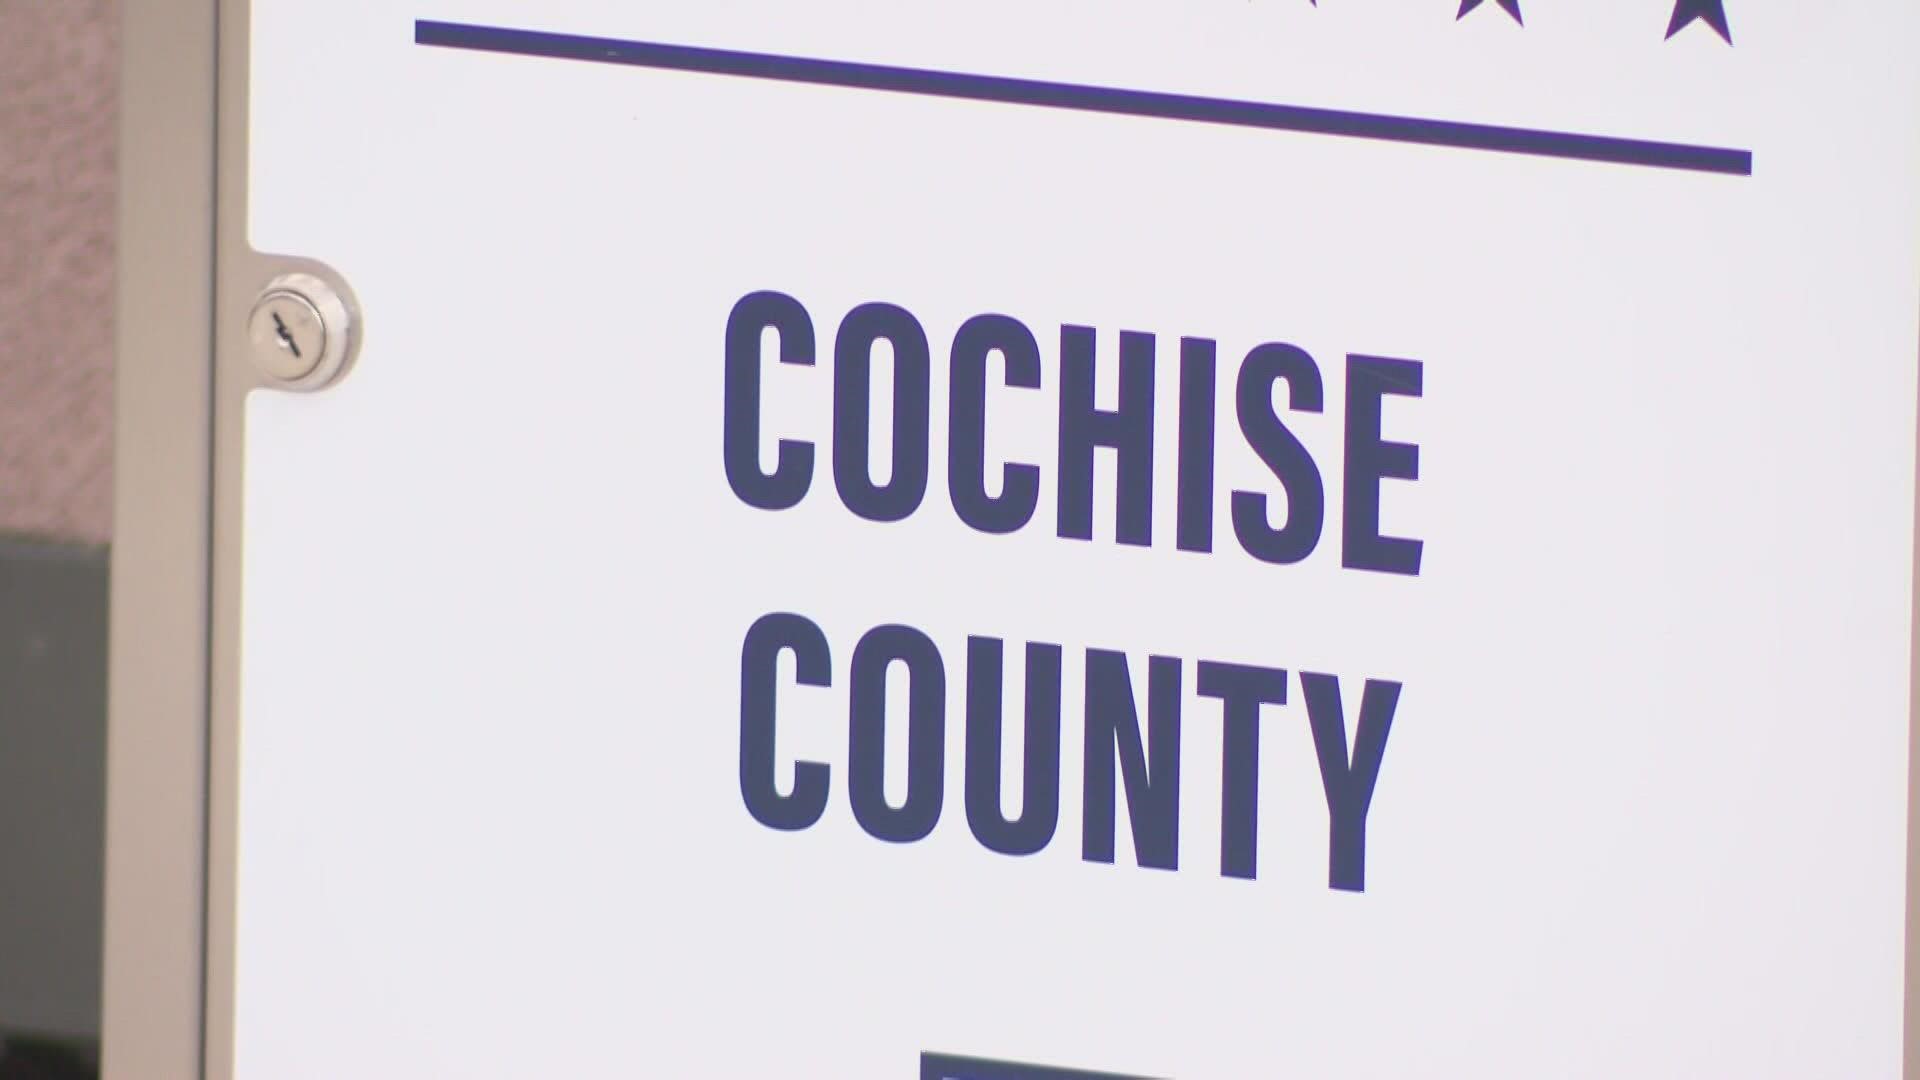 Secretary of State Katie Hobbs asked a judge on Monday to order Cochise County officials to canvass the election